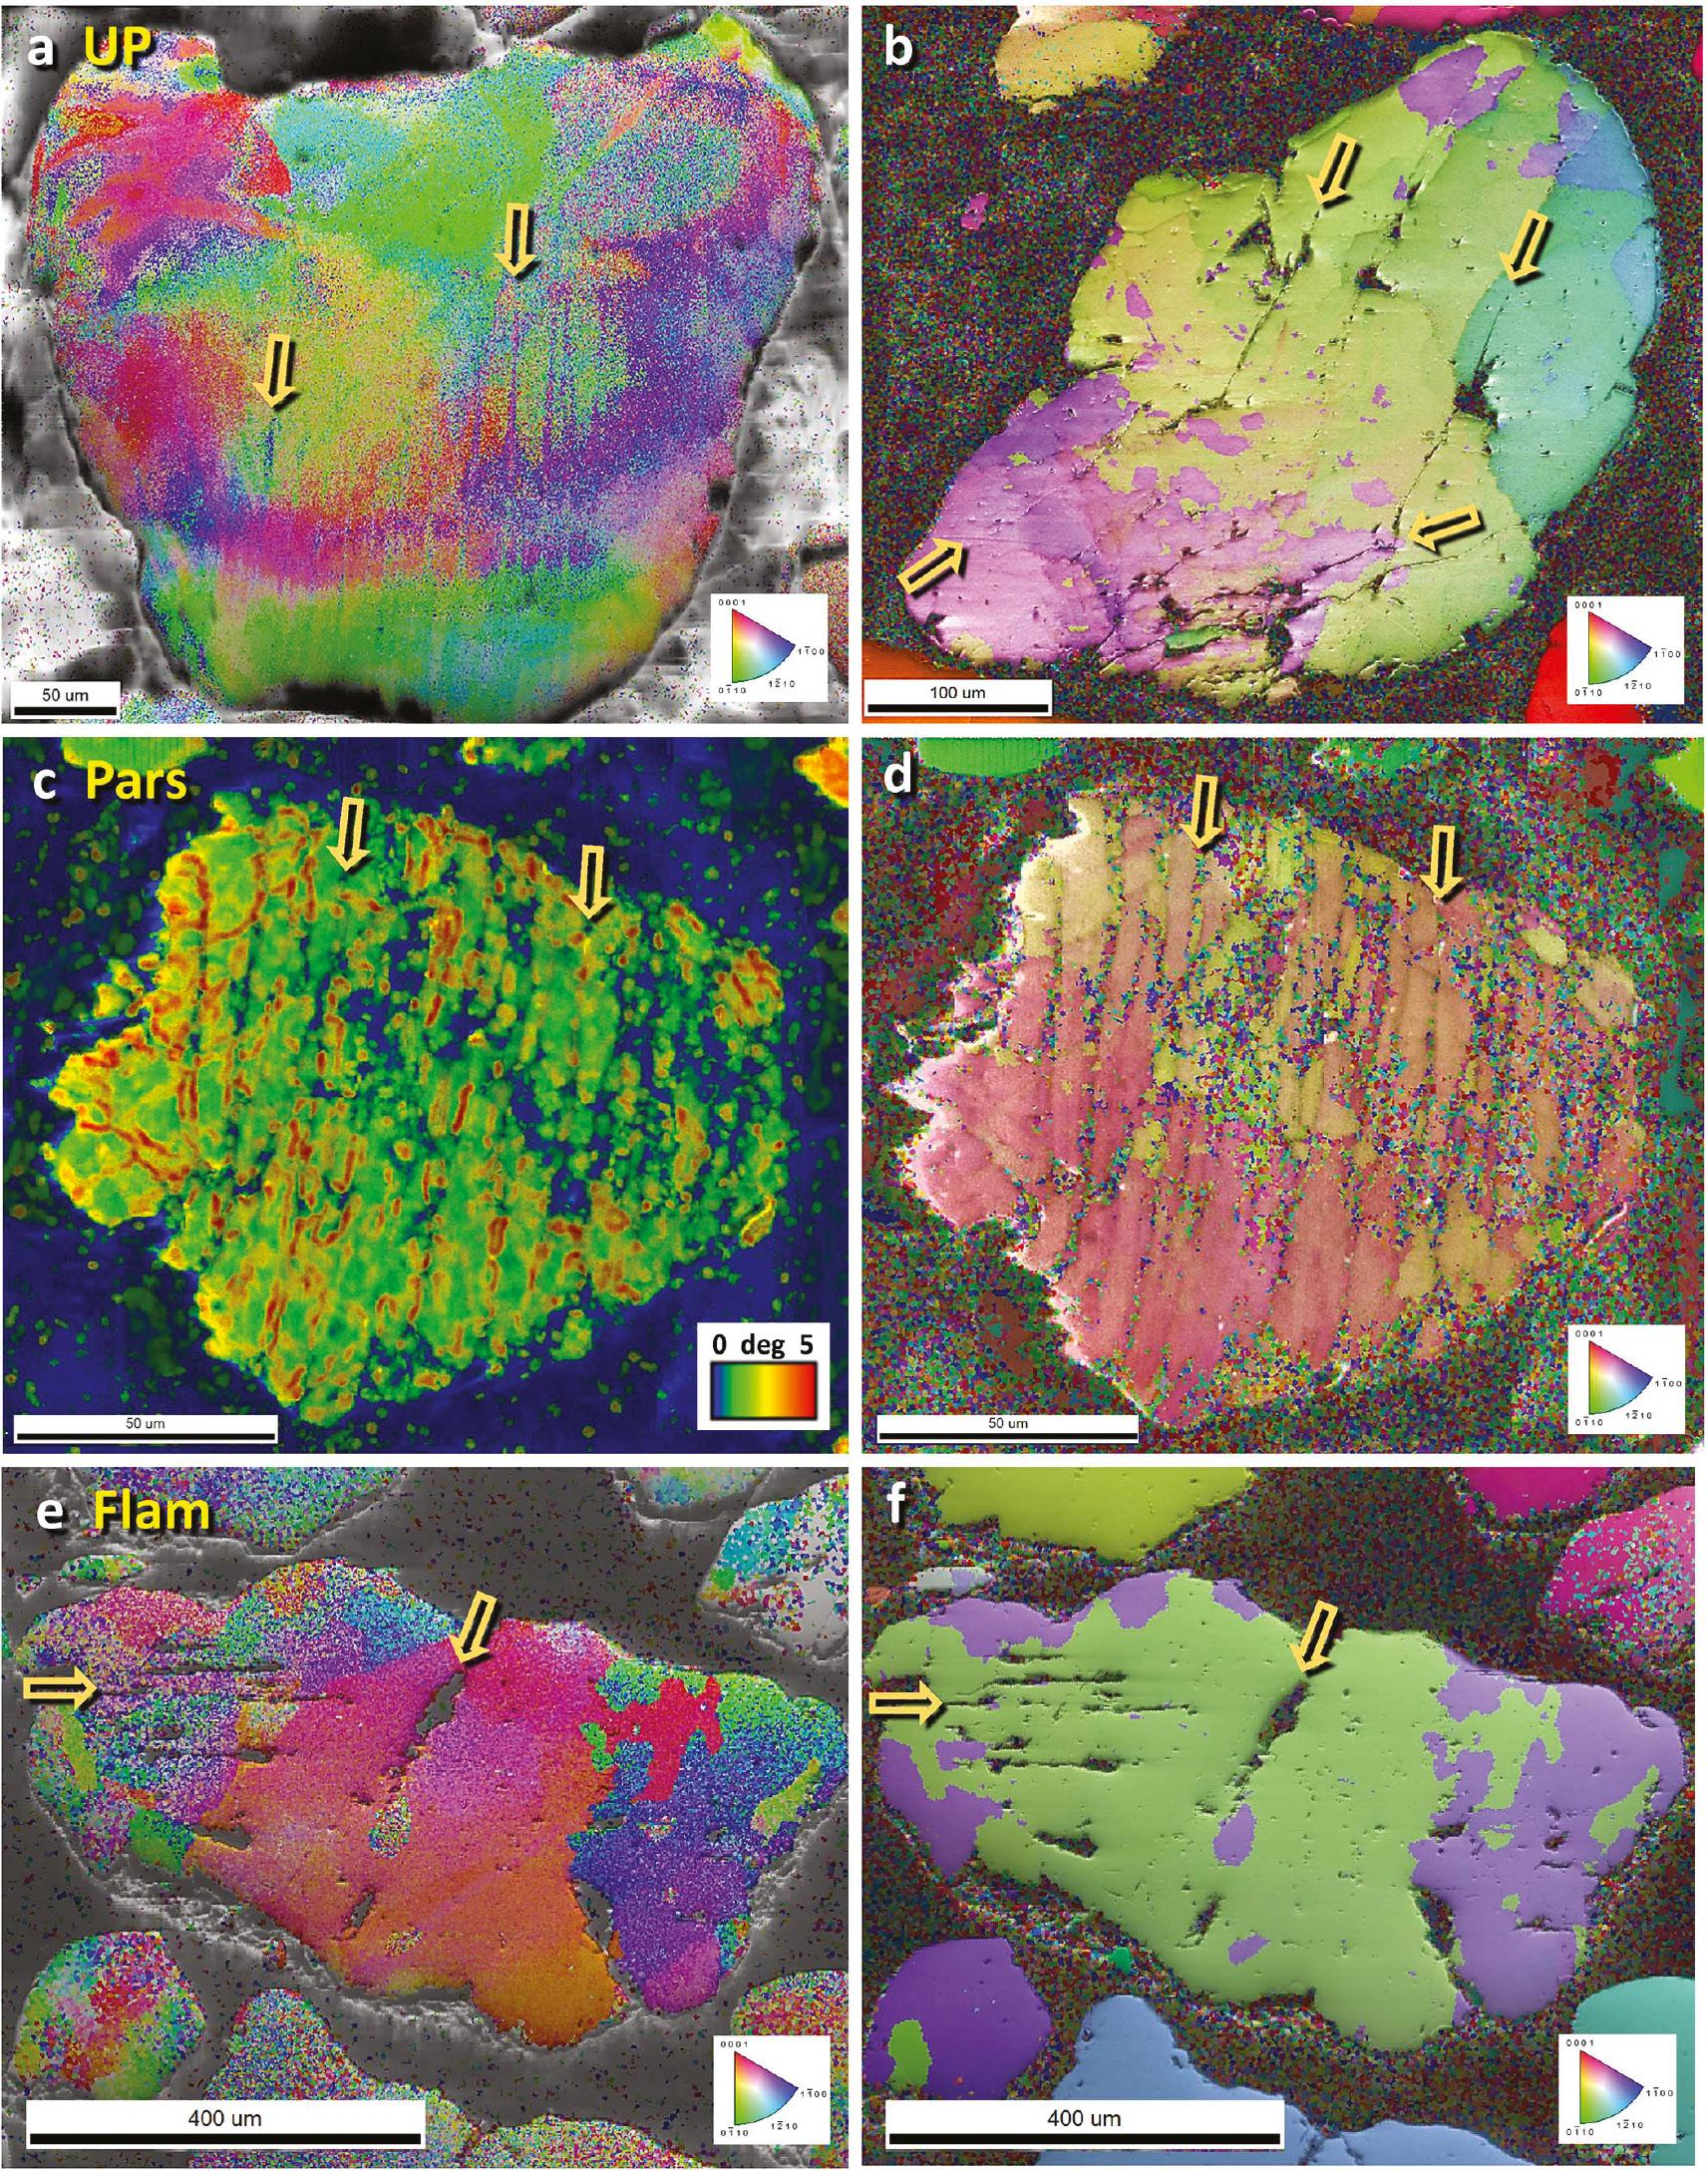 Shock-fractured quartz grains from Newtonville Site (a-c), Parsons Island Site (d-f), and Flamingo Bay (g-i). Images were acquired by electron backscatter diffraction (EBSD). The yellow arrows mark fractures. The inset legend at the lower right for each image except panel c shows the color-coded Miller-Bravais crystalline axes. For a detailed description of the EBSD analytical techniques used in this Figure, click on Supplementary Information, “Methods: Instrumentation and Analytical Details.” (a) Newtonville (UP-COA1) quartz grain 18x14. The wide range and variation of colors indicate thermal or mechanical damage to this grain’s lattice. (b) Newtonville (UP-COA1) quartz grain 13x06. The green and red colors represent the two Dauphine twin domains rotated 60° around the c-axis. The twinning is minimally associated with the fractures. (c) Pars-45 quartz grain 22x-07. A multi-colored misorientation scale is inset at the lower right. The colors represent the degrees of misorientation (i.e., damage) of the crystalline structure, ranging from 0 degrees (blue) to ∼5 degrees (red). The largest misorientations (red) are concentrated along the fractures. (d) Pars-45 quartz grain 22x-07. Reddish colors represent the quartz matrix, and orange-tan colors indicate Dauphine twinning rotated 60° around the c-axis. The twinning is closely associated with the fractures. (e) Flam-52.5 quartz grain 19x13. The wide range of colors and their extent indicate that this grain has sustained substantial lattice damage. (f) Flam-52.5 quartz grain 19x13. Green colors represent the quartz matrix, and purple indicates Dauphine twinning rotated 60° around the c-axis. The twinning is minimally associated with the fractures.